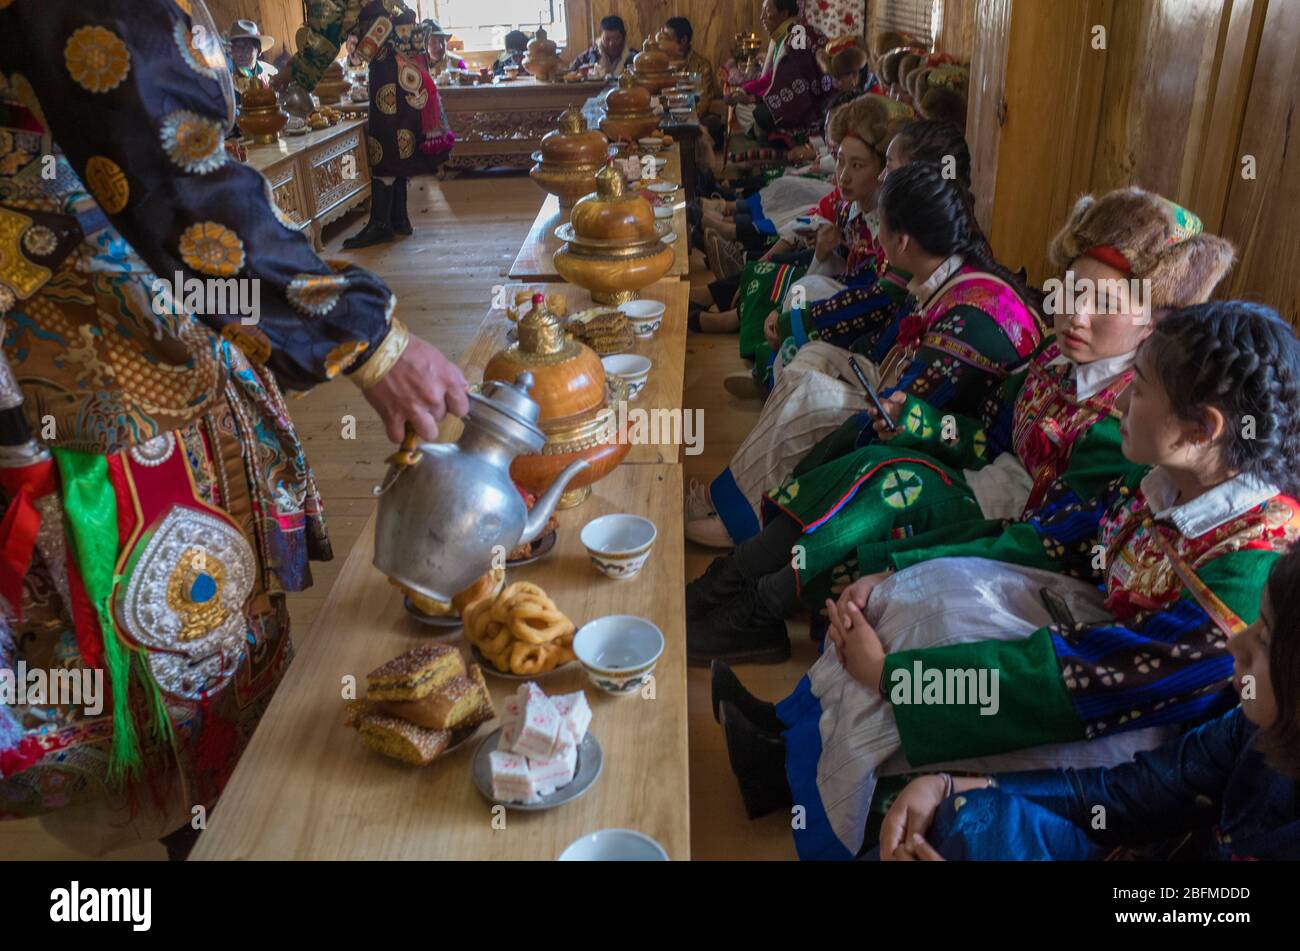 Man serving food to  bridesmaids at a Buddhist marriage feast. Shangri La China 2019 Stock Photo